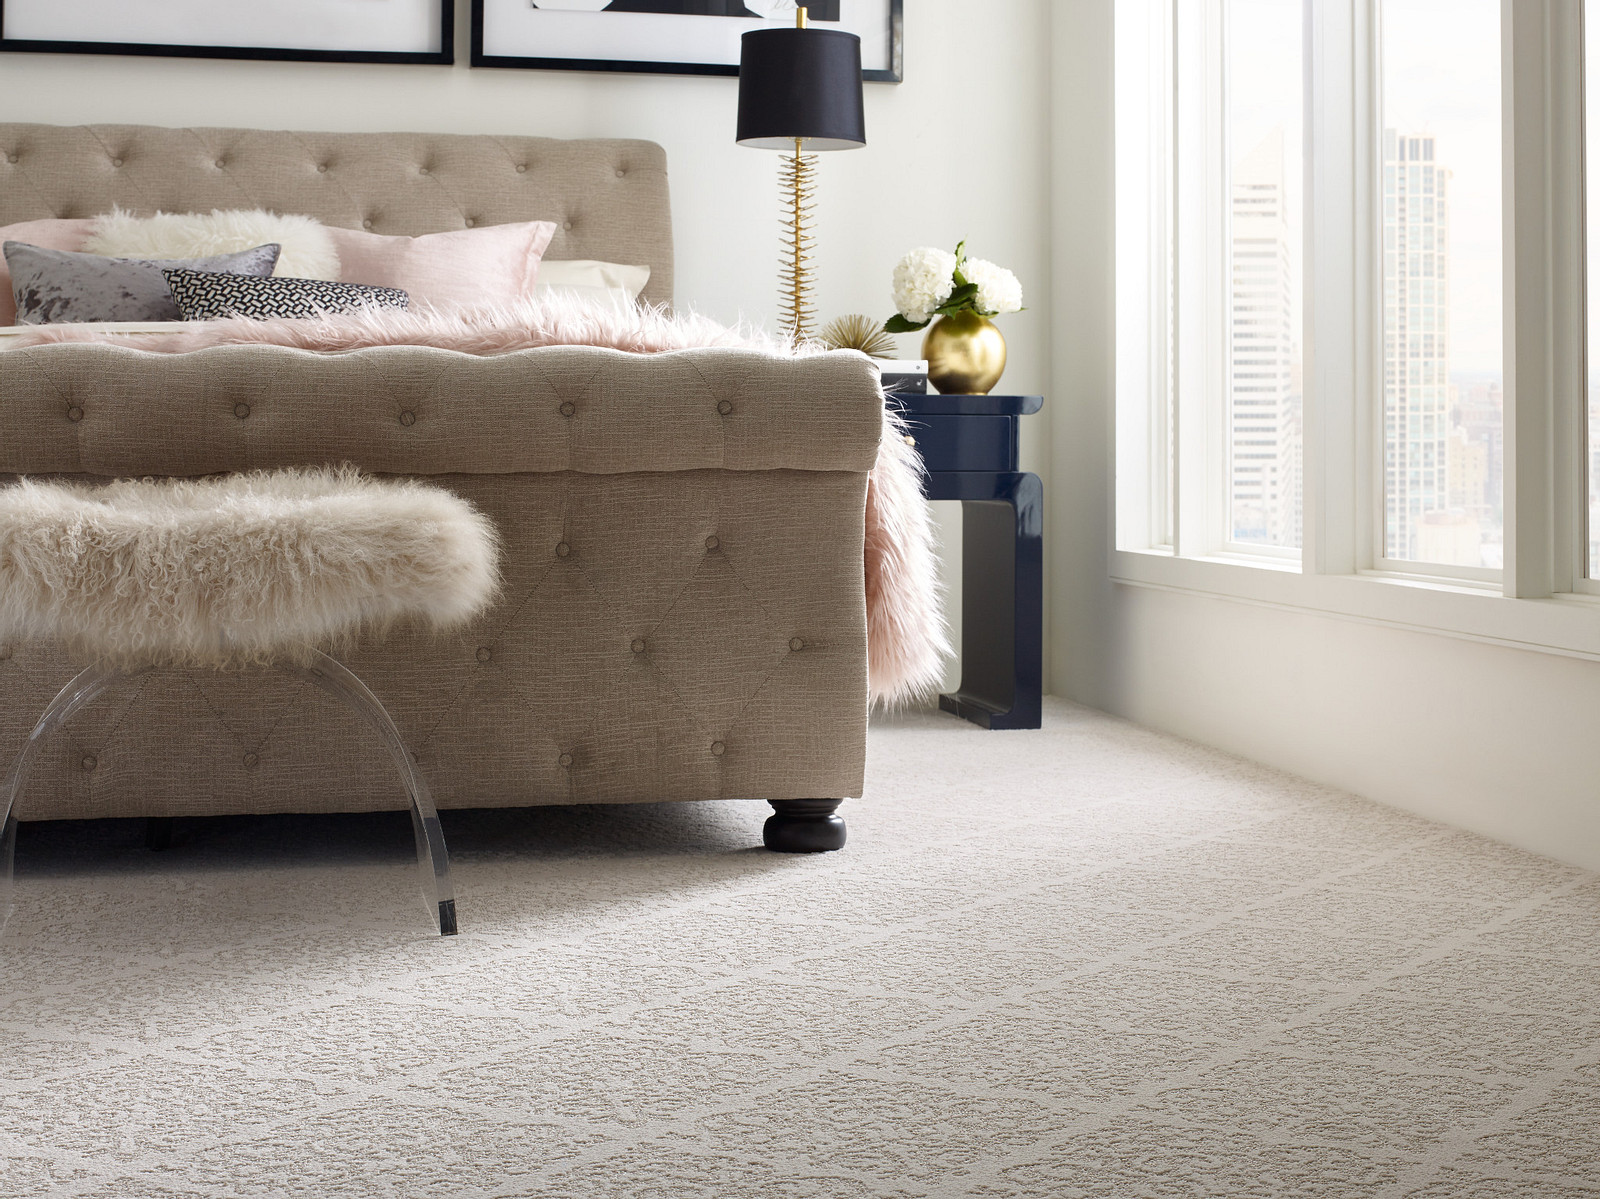 How to Choose the Perfect Carpet Flooring for your Home